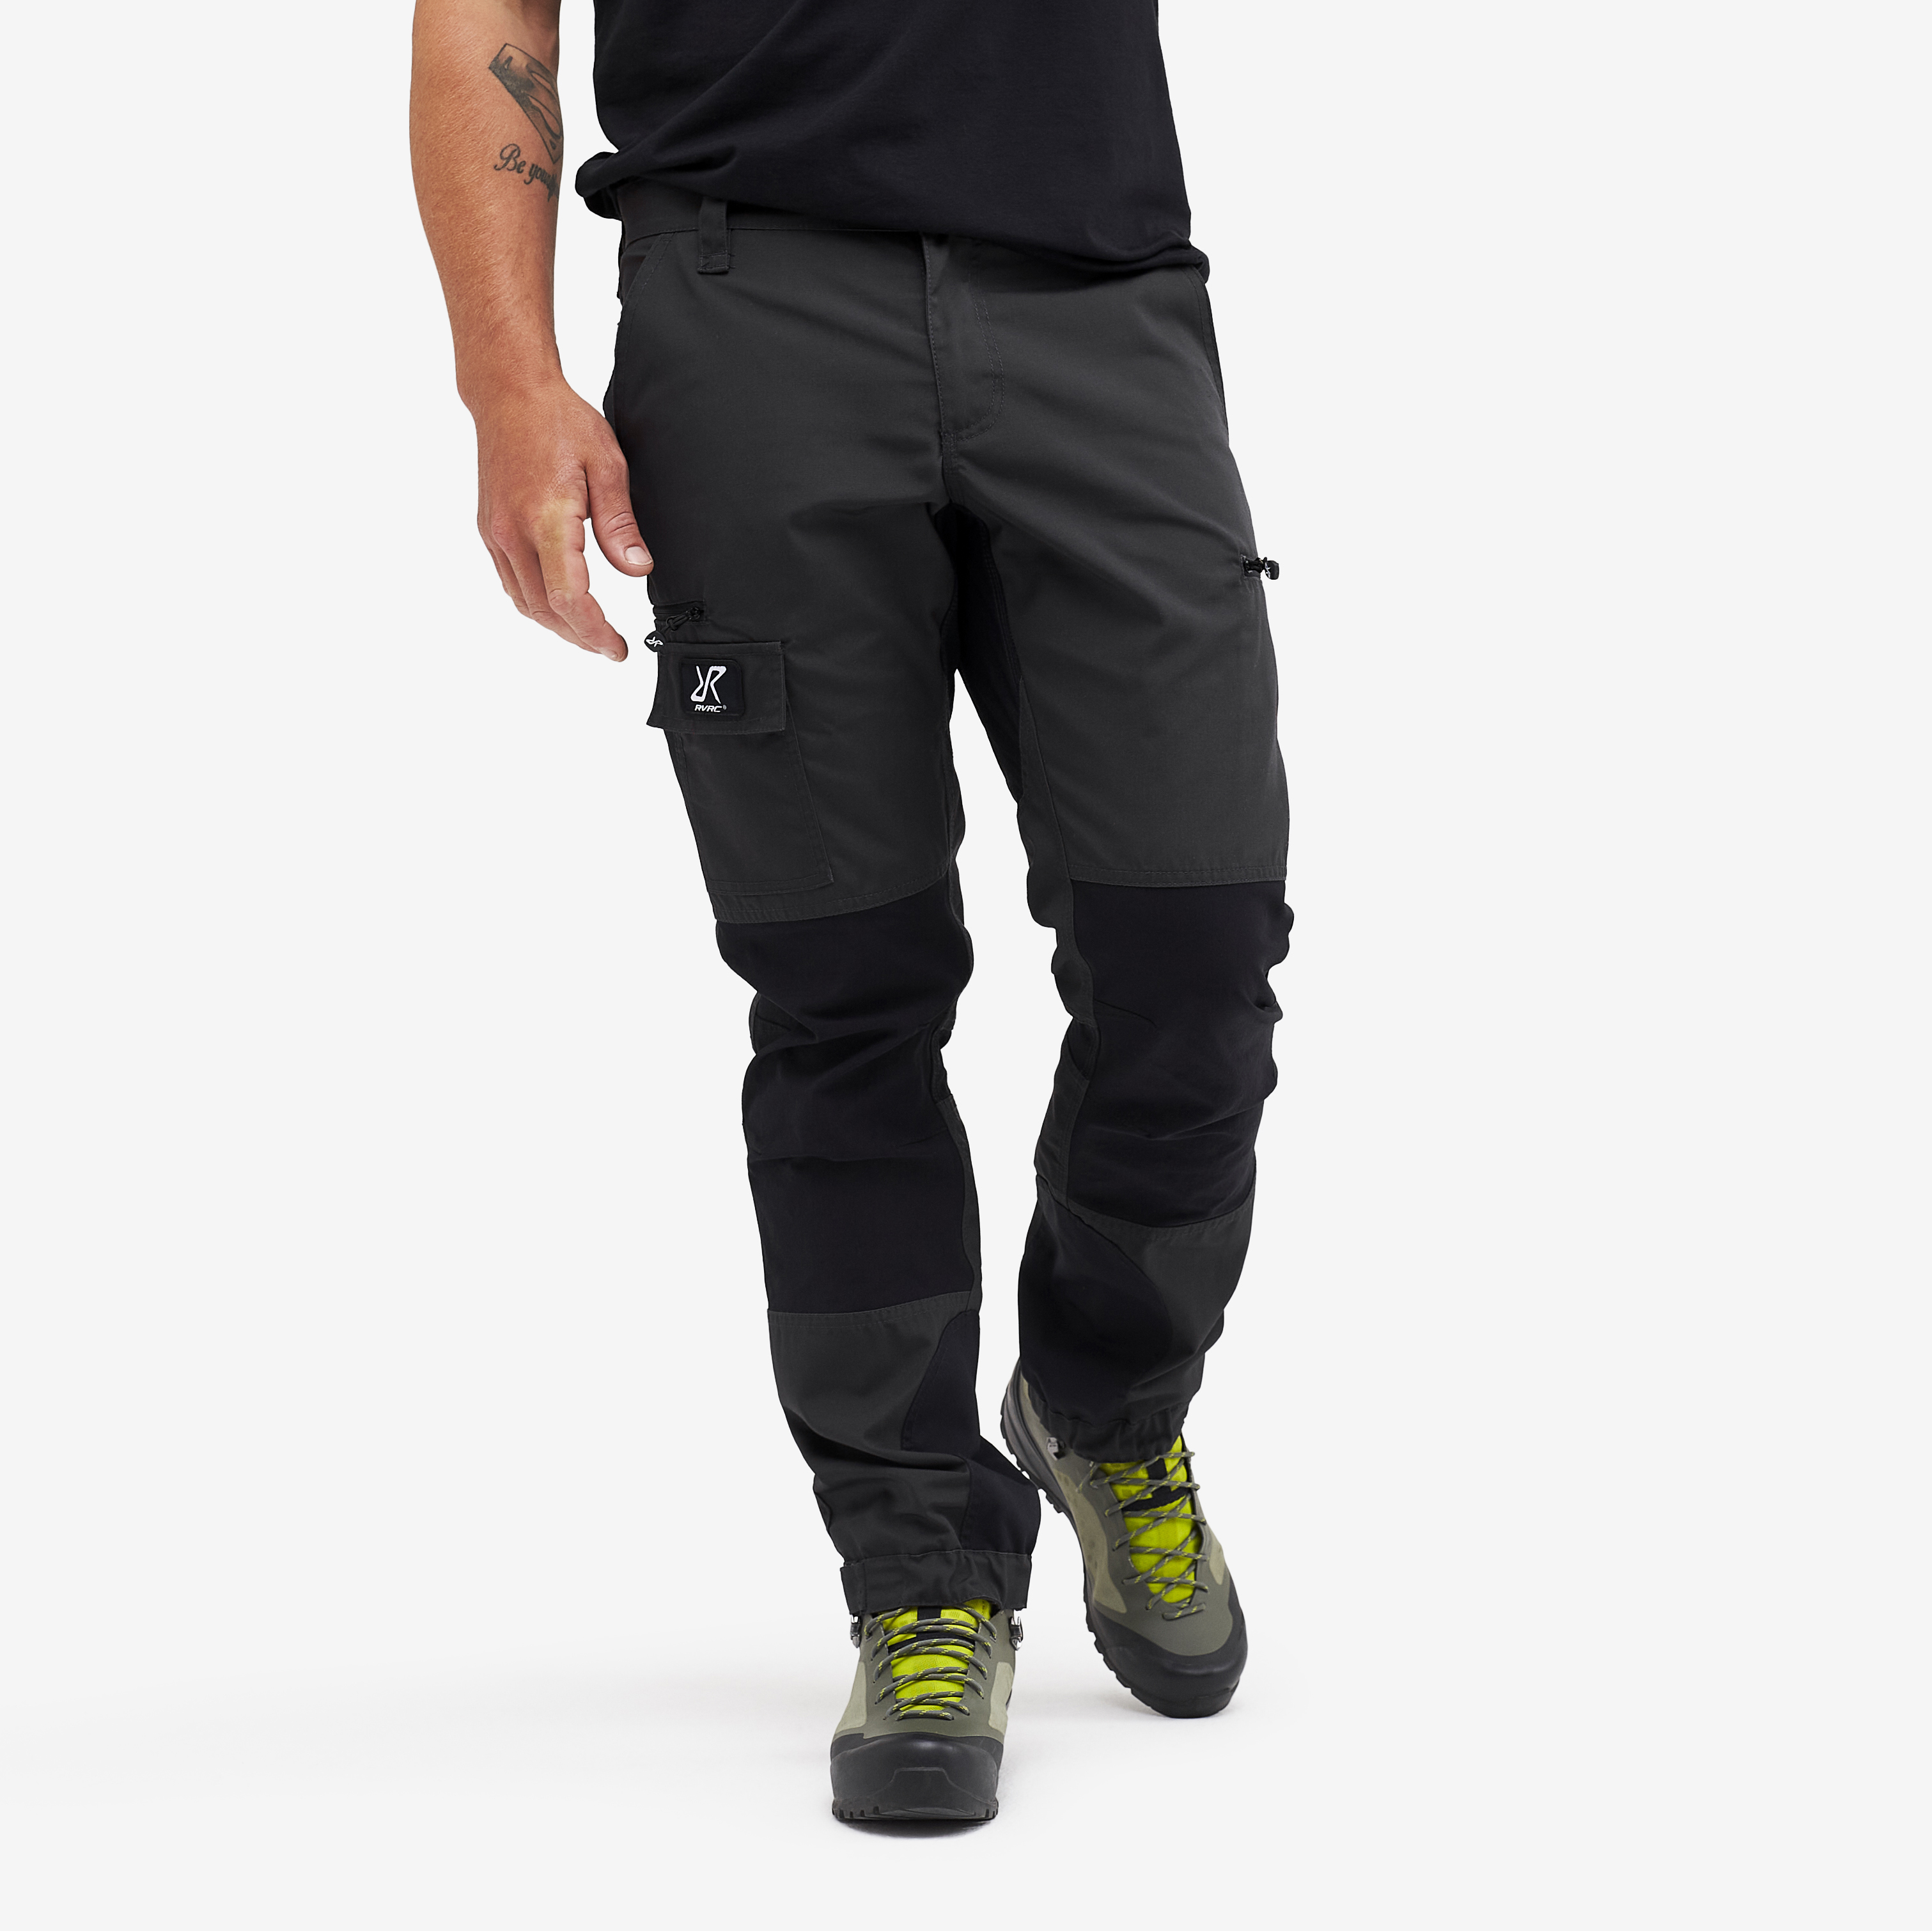 Nordwand Short Pants Anthracite Herr